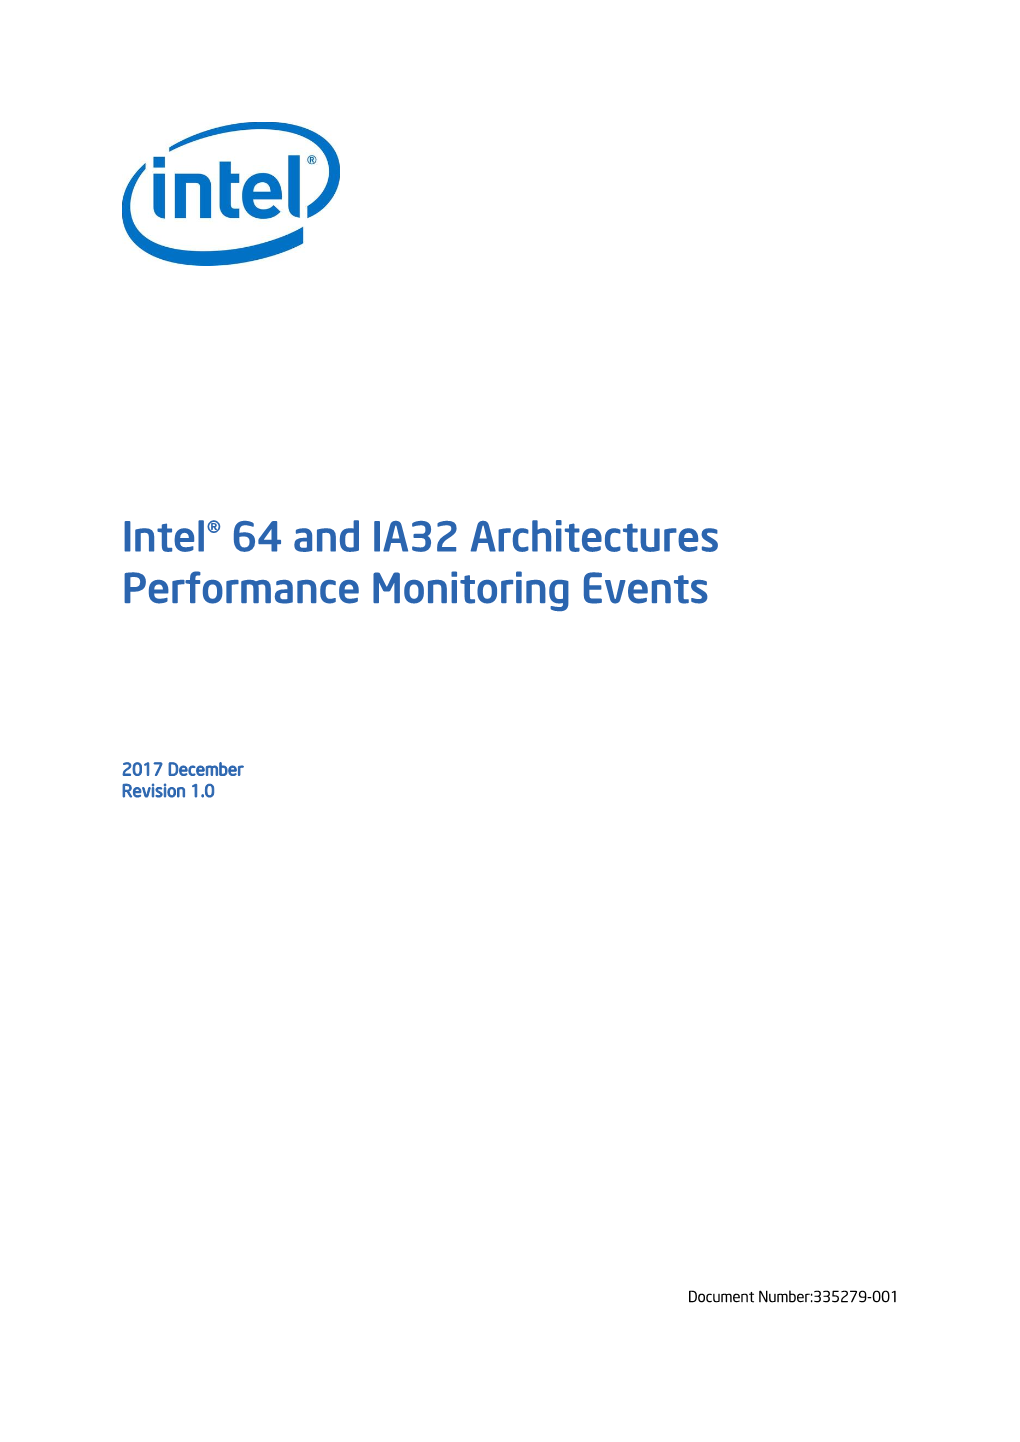 Intel® 64 and IA32 Architectures Performance Monitoring Events